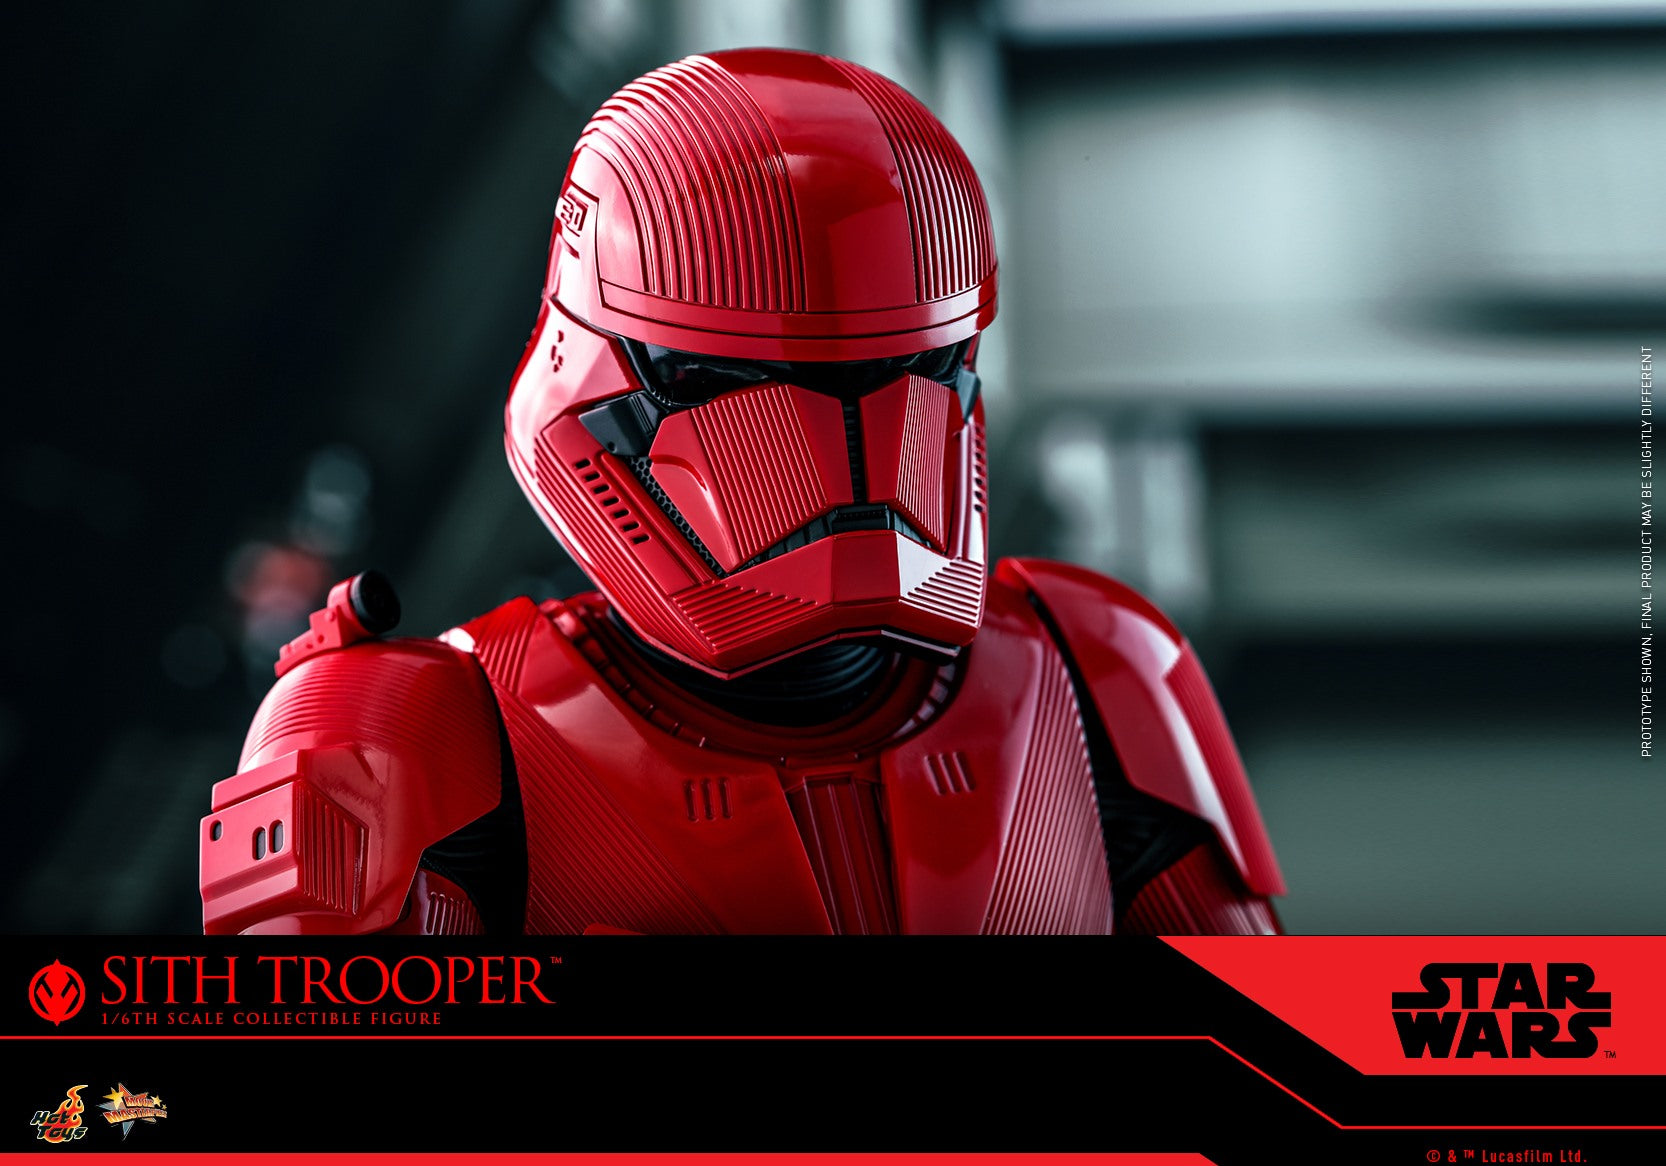 Hot Toys - MMS544 - Star Wars: The Rise of Skywalker - Sith Trooper - Marvelous Toys